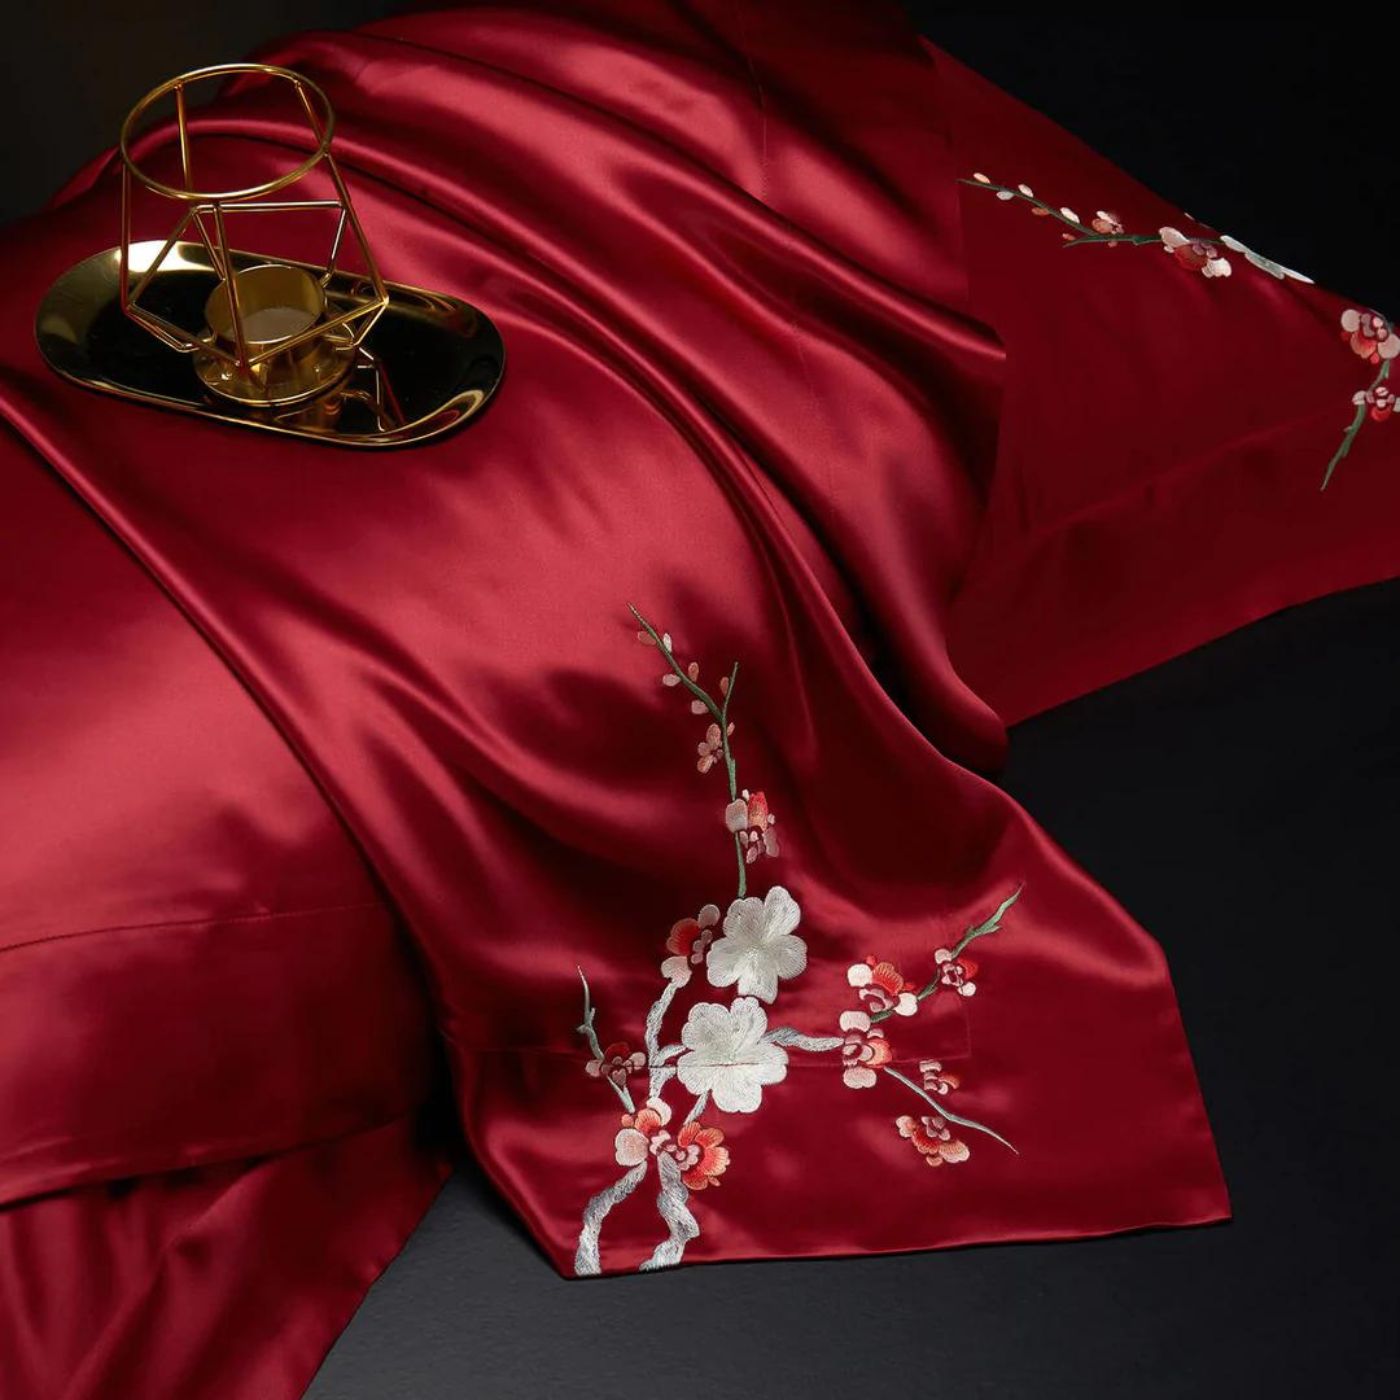 Red Sakura Blossom Embroidered 22 MM momme Silk Pillowcase Oxford Style Envelope Closure 100% mulberry silk pure pillowcase luxury red gift 6A grade